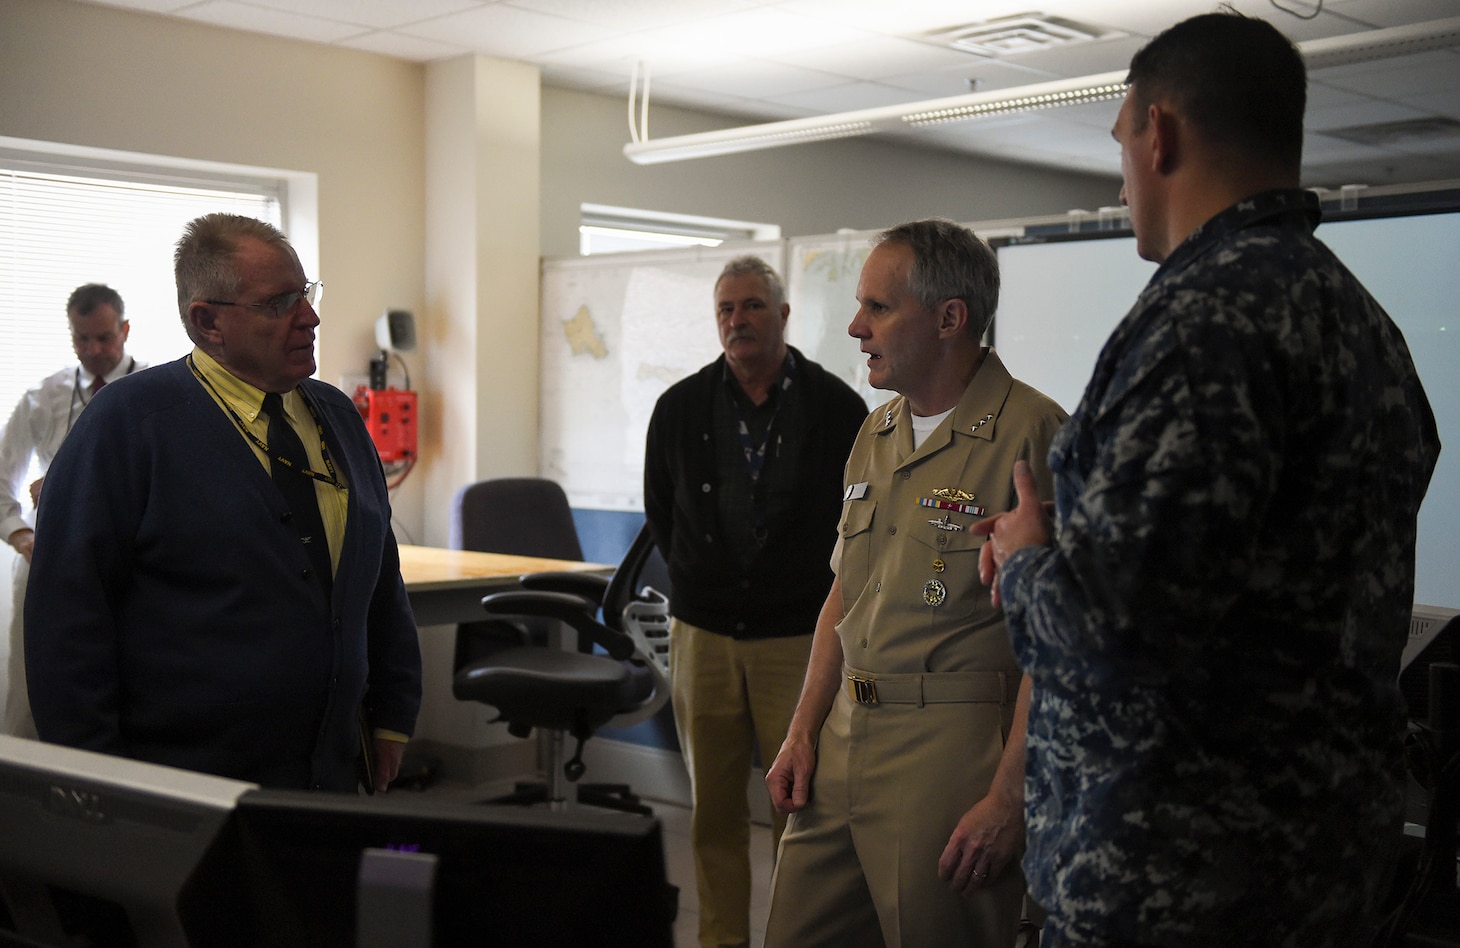 NEWPORT, R.I. (Feb. 21, 2018) Vice Adm. Phil Sawyer, commander, U.S. 7th Fleet, talks with Bud Weeks (left), director, Surface Warfare Officers School's (SWOS) Navigation, Seamanship and Shiphandling and Capt. Scott Robertson (right), SWOS' commanding officer during a visit to the school. Sawyer’s purpose was to provide an overview of 7th Fleet readiness and to provide feedback on how training ties into ensuring safe and effective operations at sea.